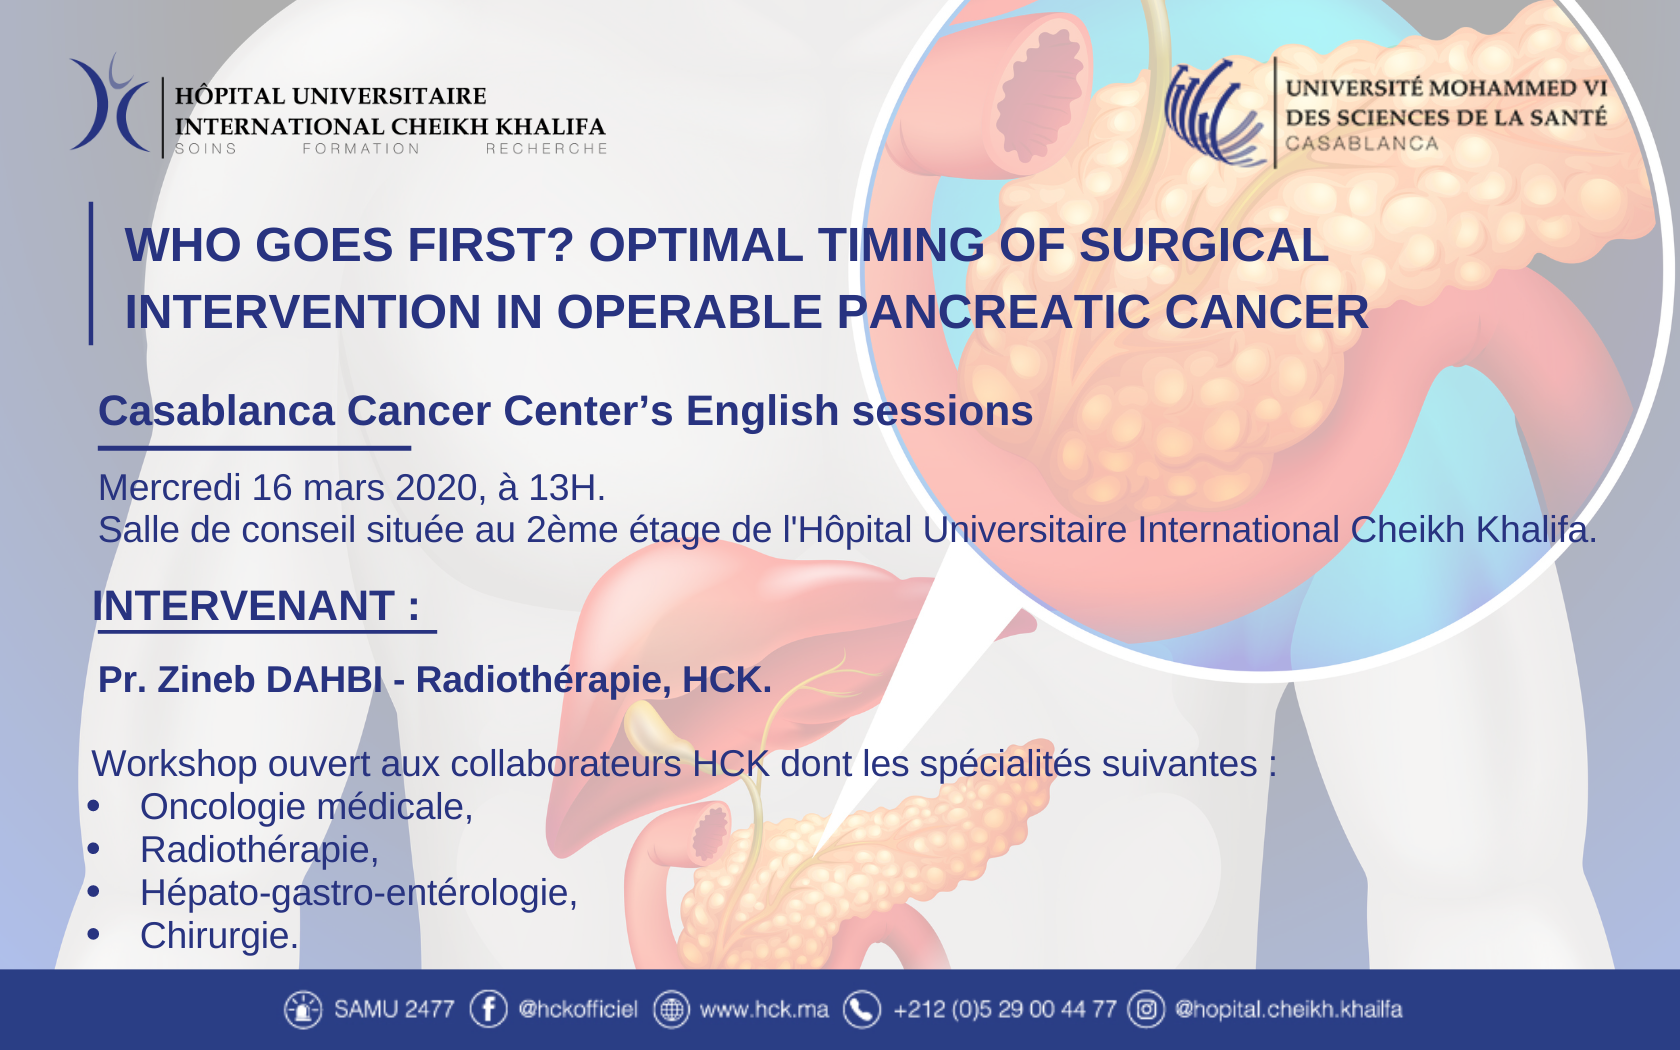 CCC's ENGLISH SESSION : WHO GOES FIRST? OPTIMAL TIMING OF SURGICAL INTERVENTION IN OPERABLE PANCREATIC CANCER